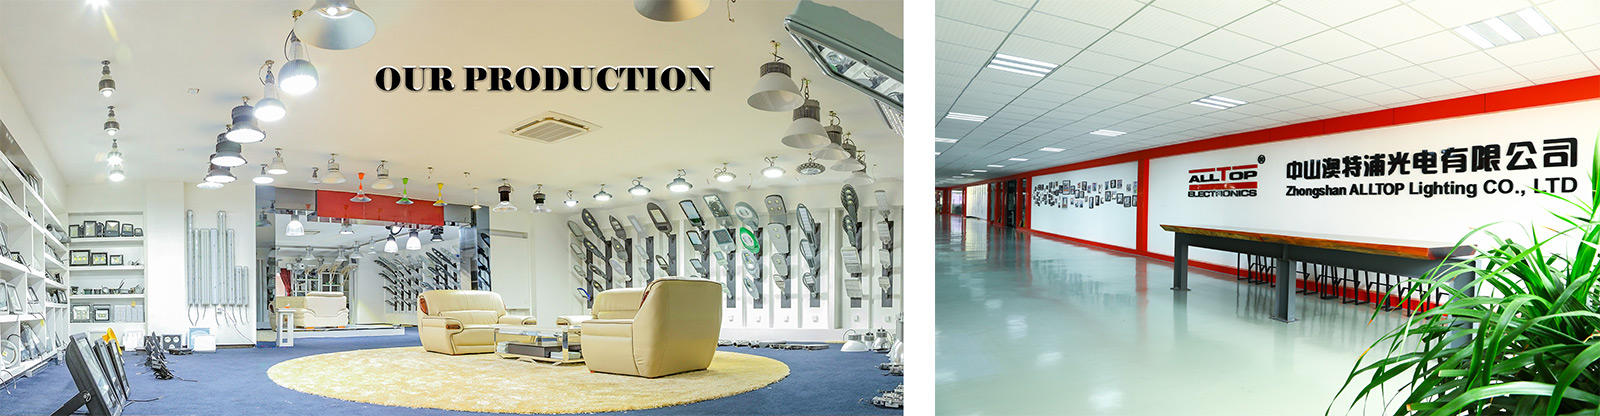 ALLTOP germicidal lamps company for air disinfection